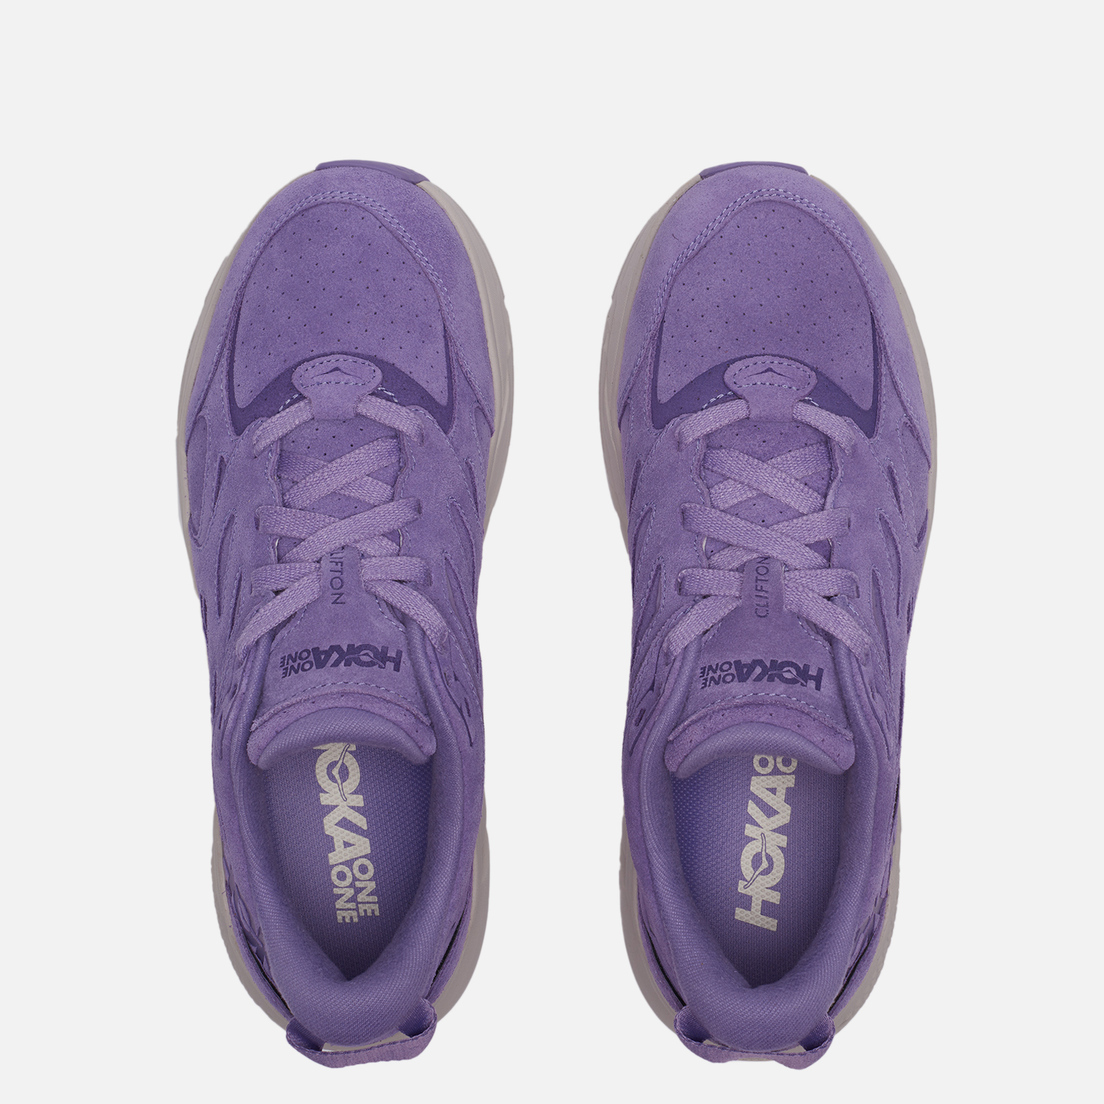 Hoka One One Кроссовки Clifton Suede